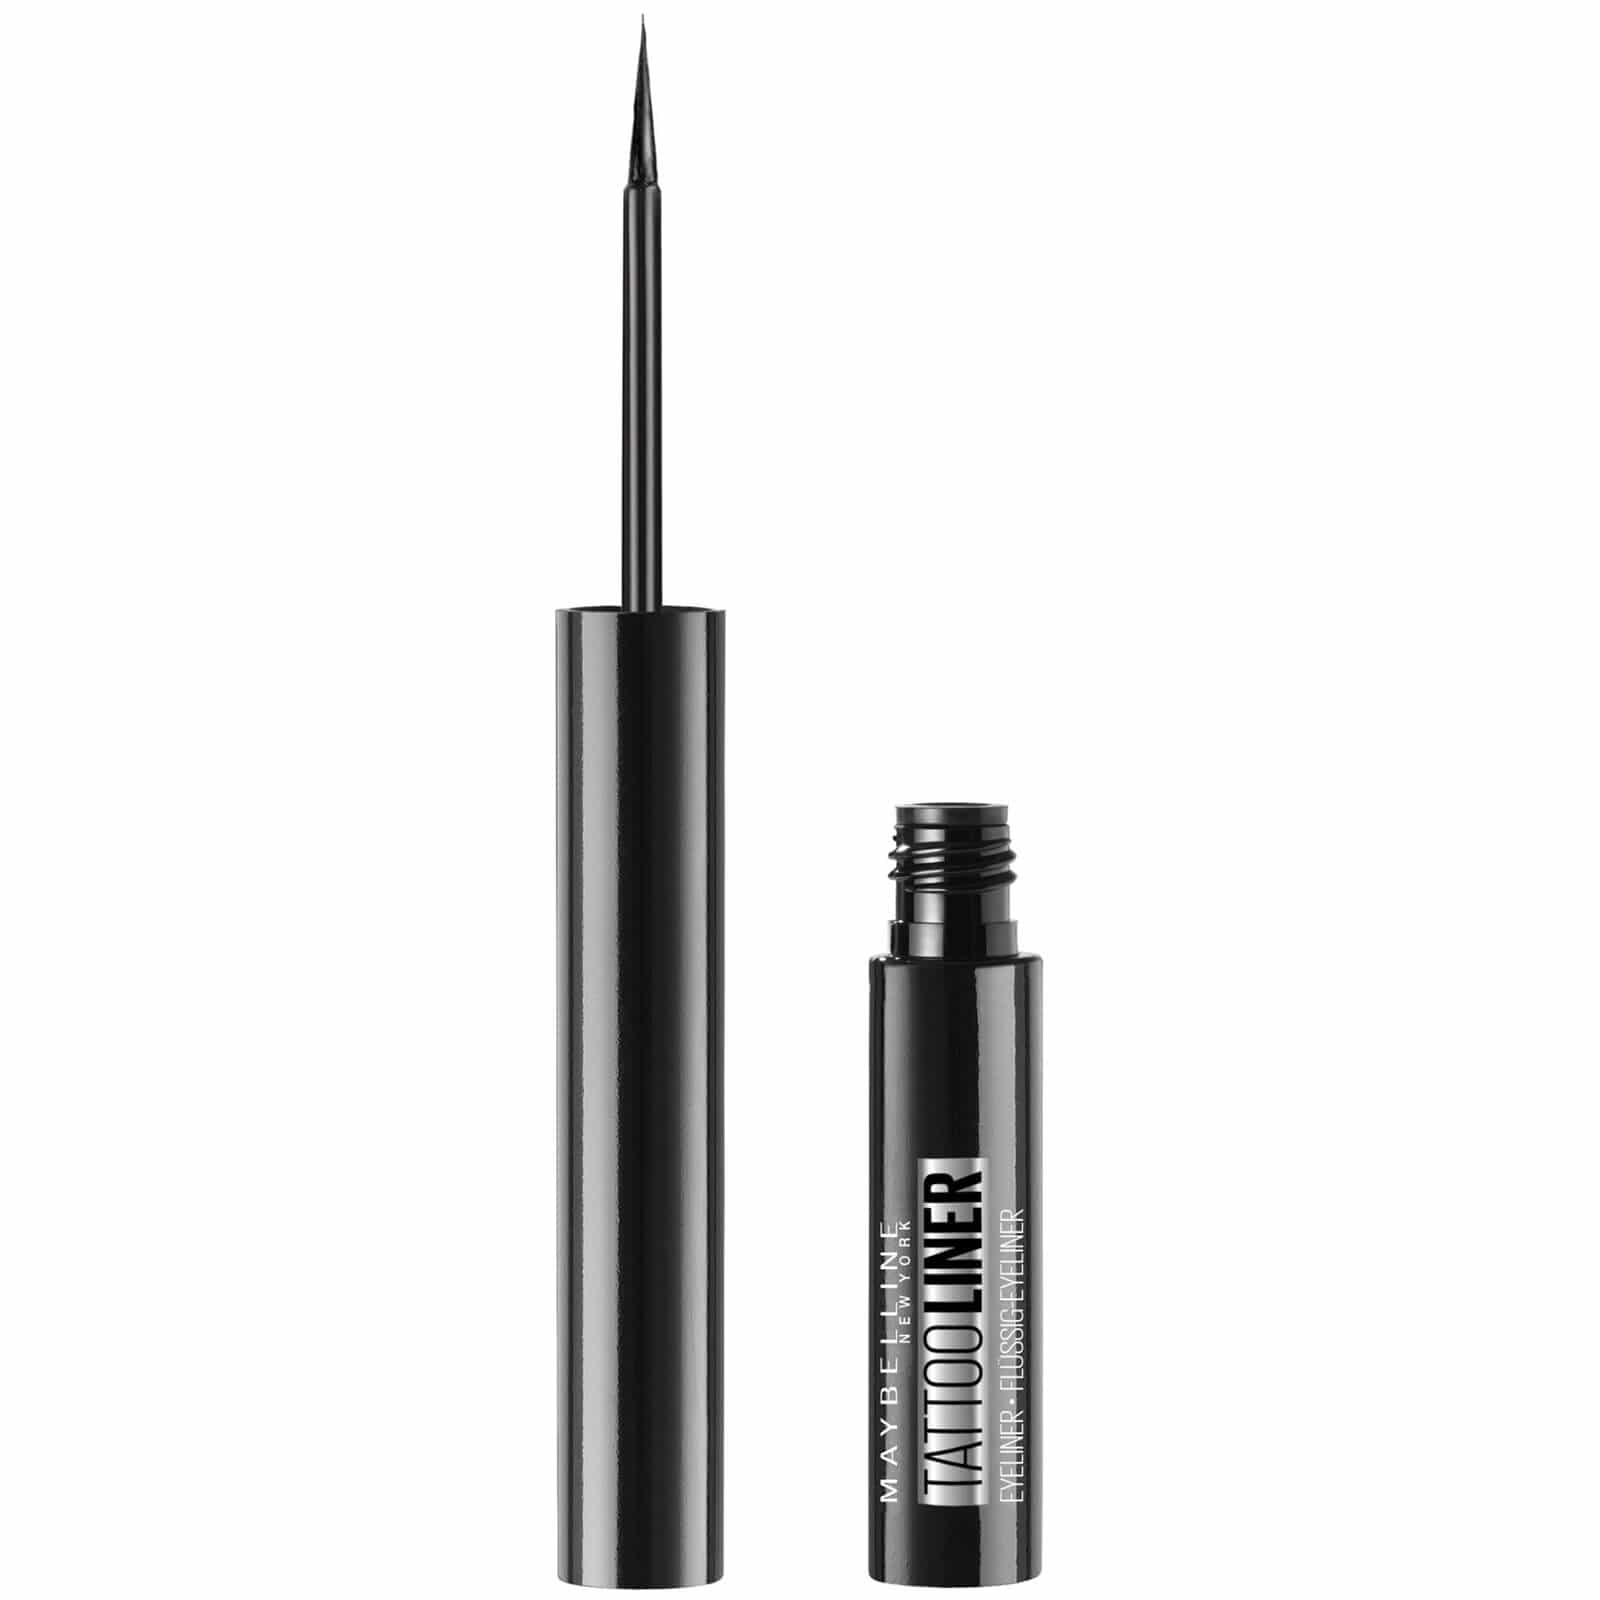 Tattoo Liner Ink Black | Maybelline - Give Us Beauty